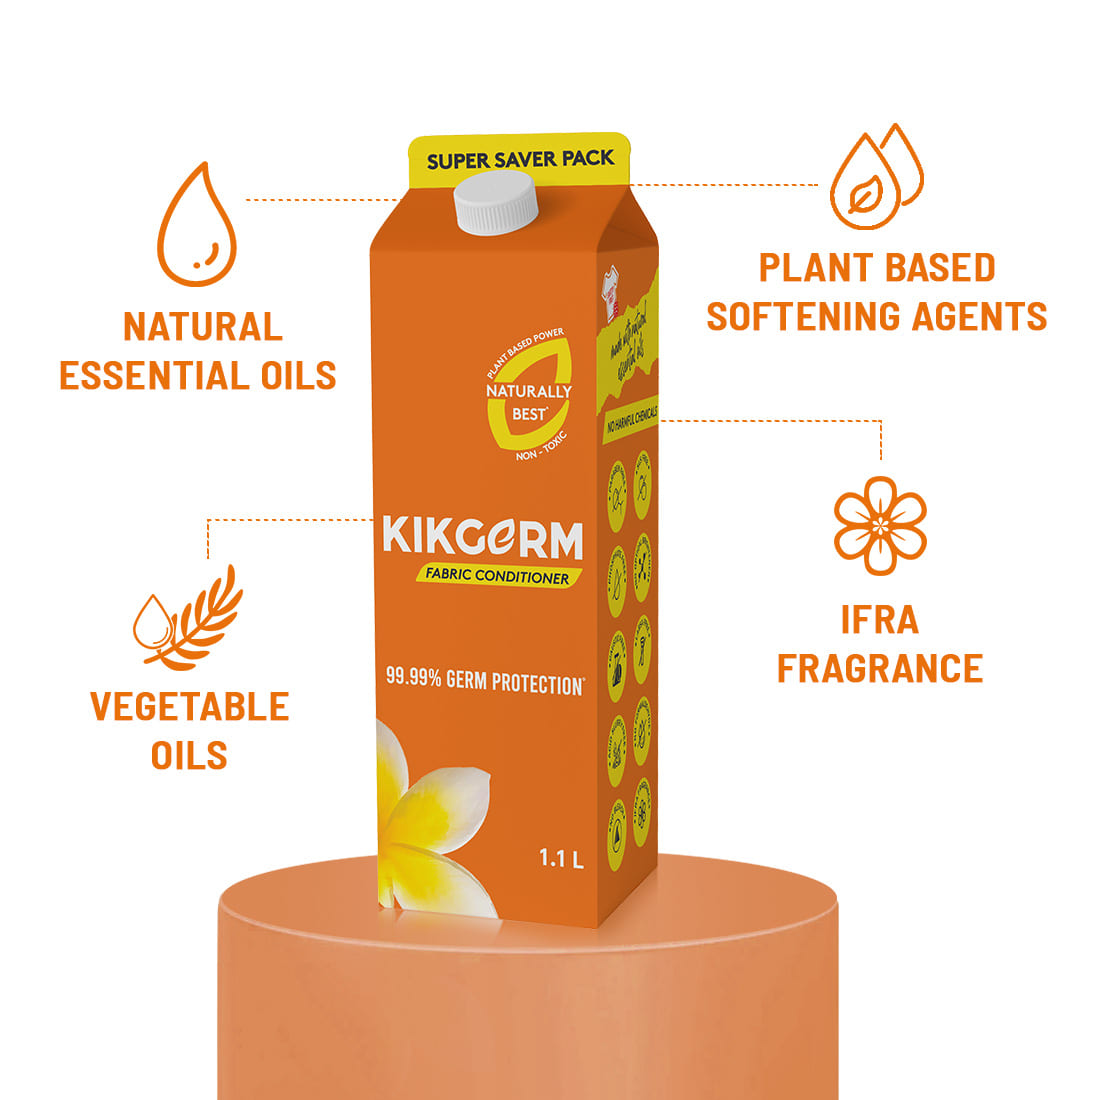 KIKGERM Naturally Best Fabric Conditioner | No Harmful Chemicals & 99.99% Germ Protection | New & Shiny Clothes | 1.1L X 3 (3300ML)